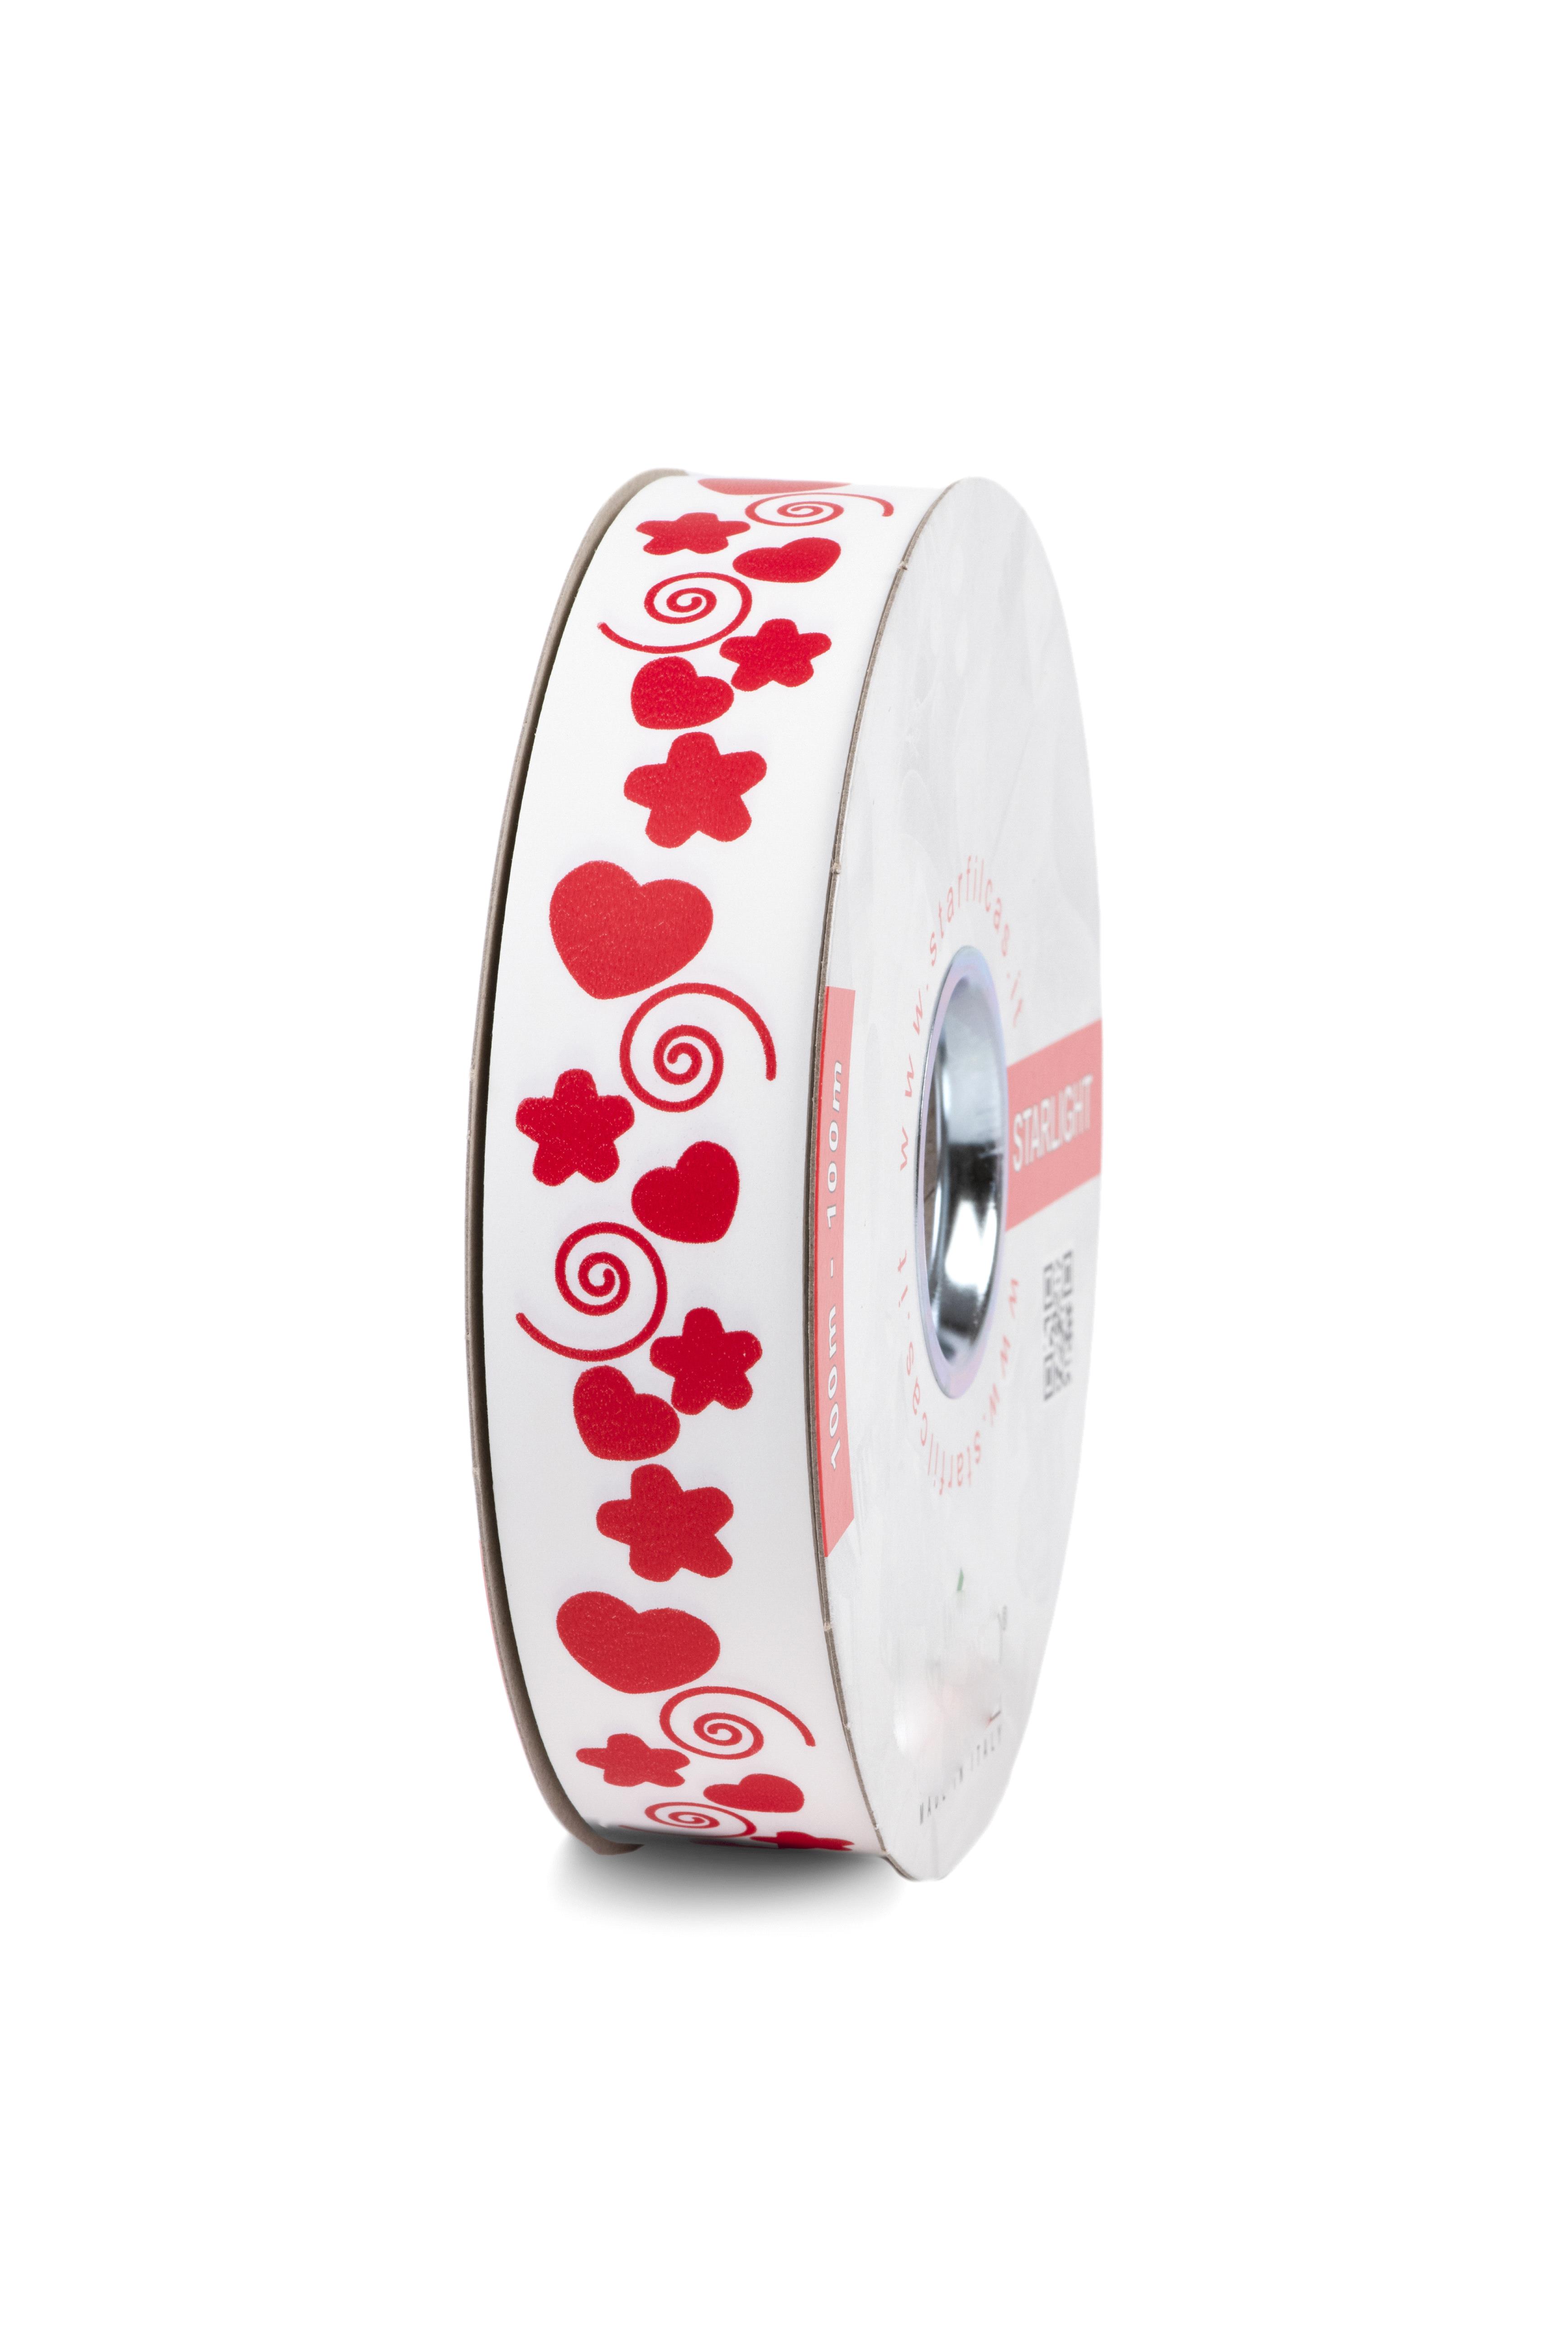 HEARTS, S.VALENTINE, MOM'S DAY, ACCESSORIES WITH HEART-BALLOONS,RIBBONS, LABEL ETC, RONTELLA ONLY YOU 19 MM 50 MT